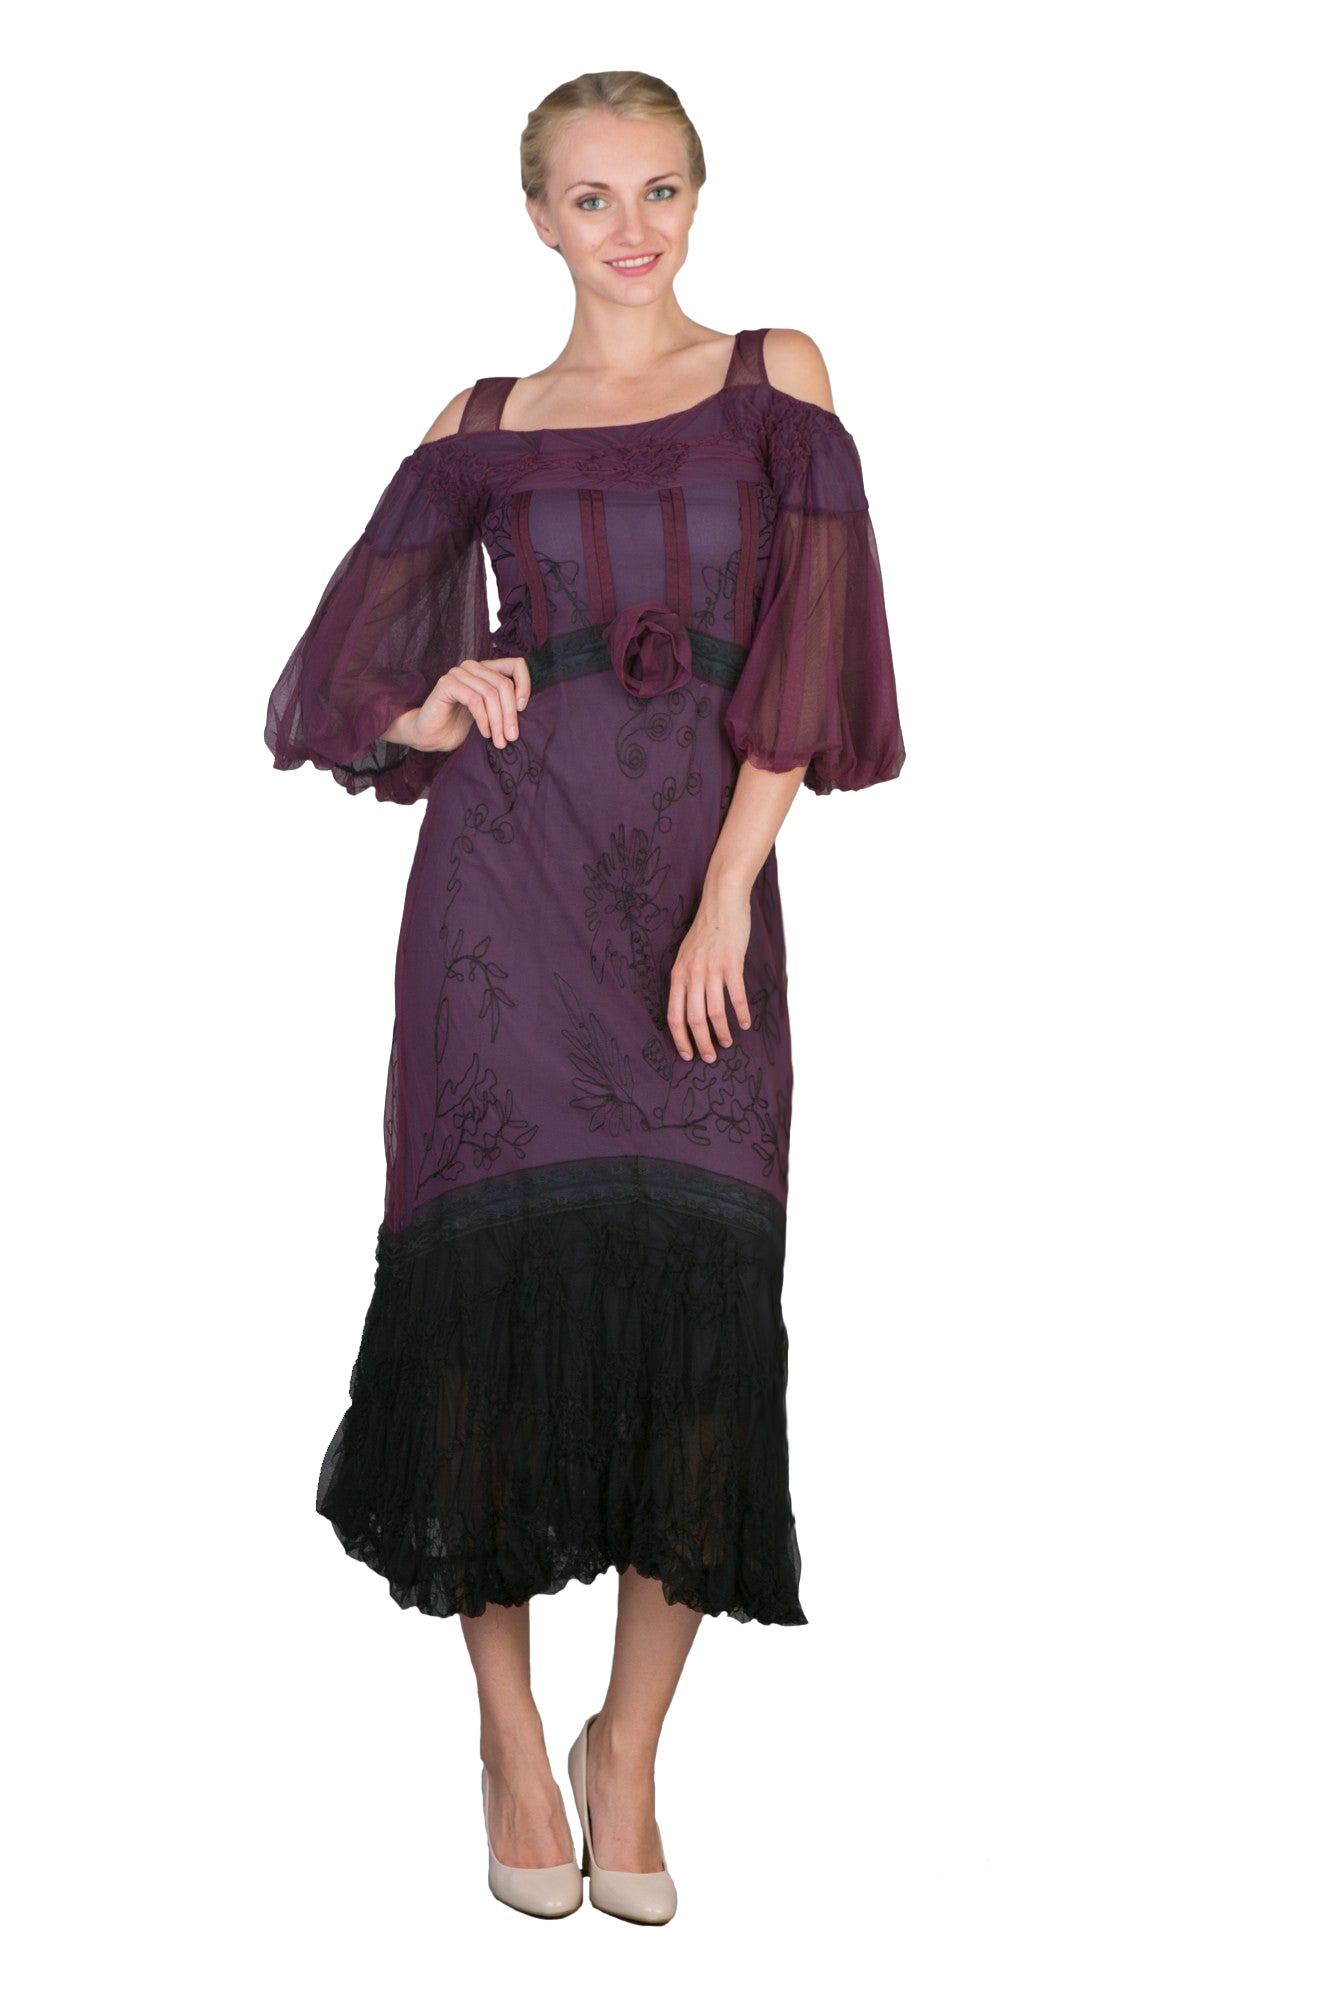 Off-Shoulder Vintage Style Party Dress in Purple by Nataya - SOLD OUT